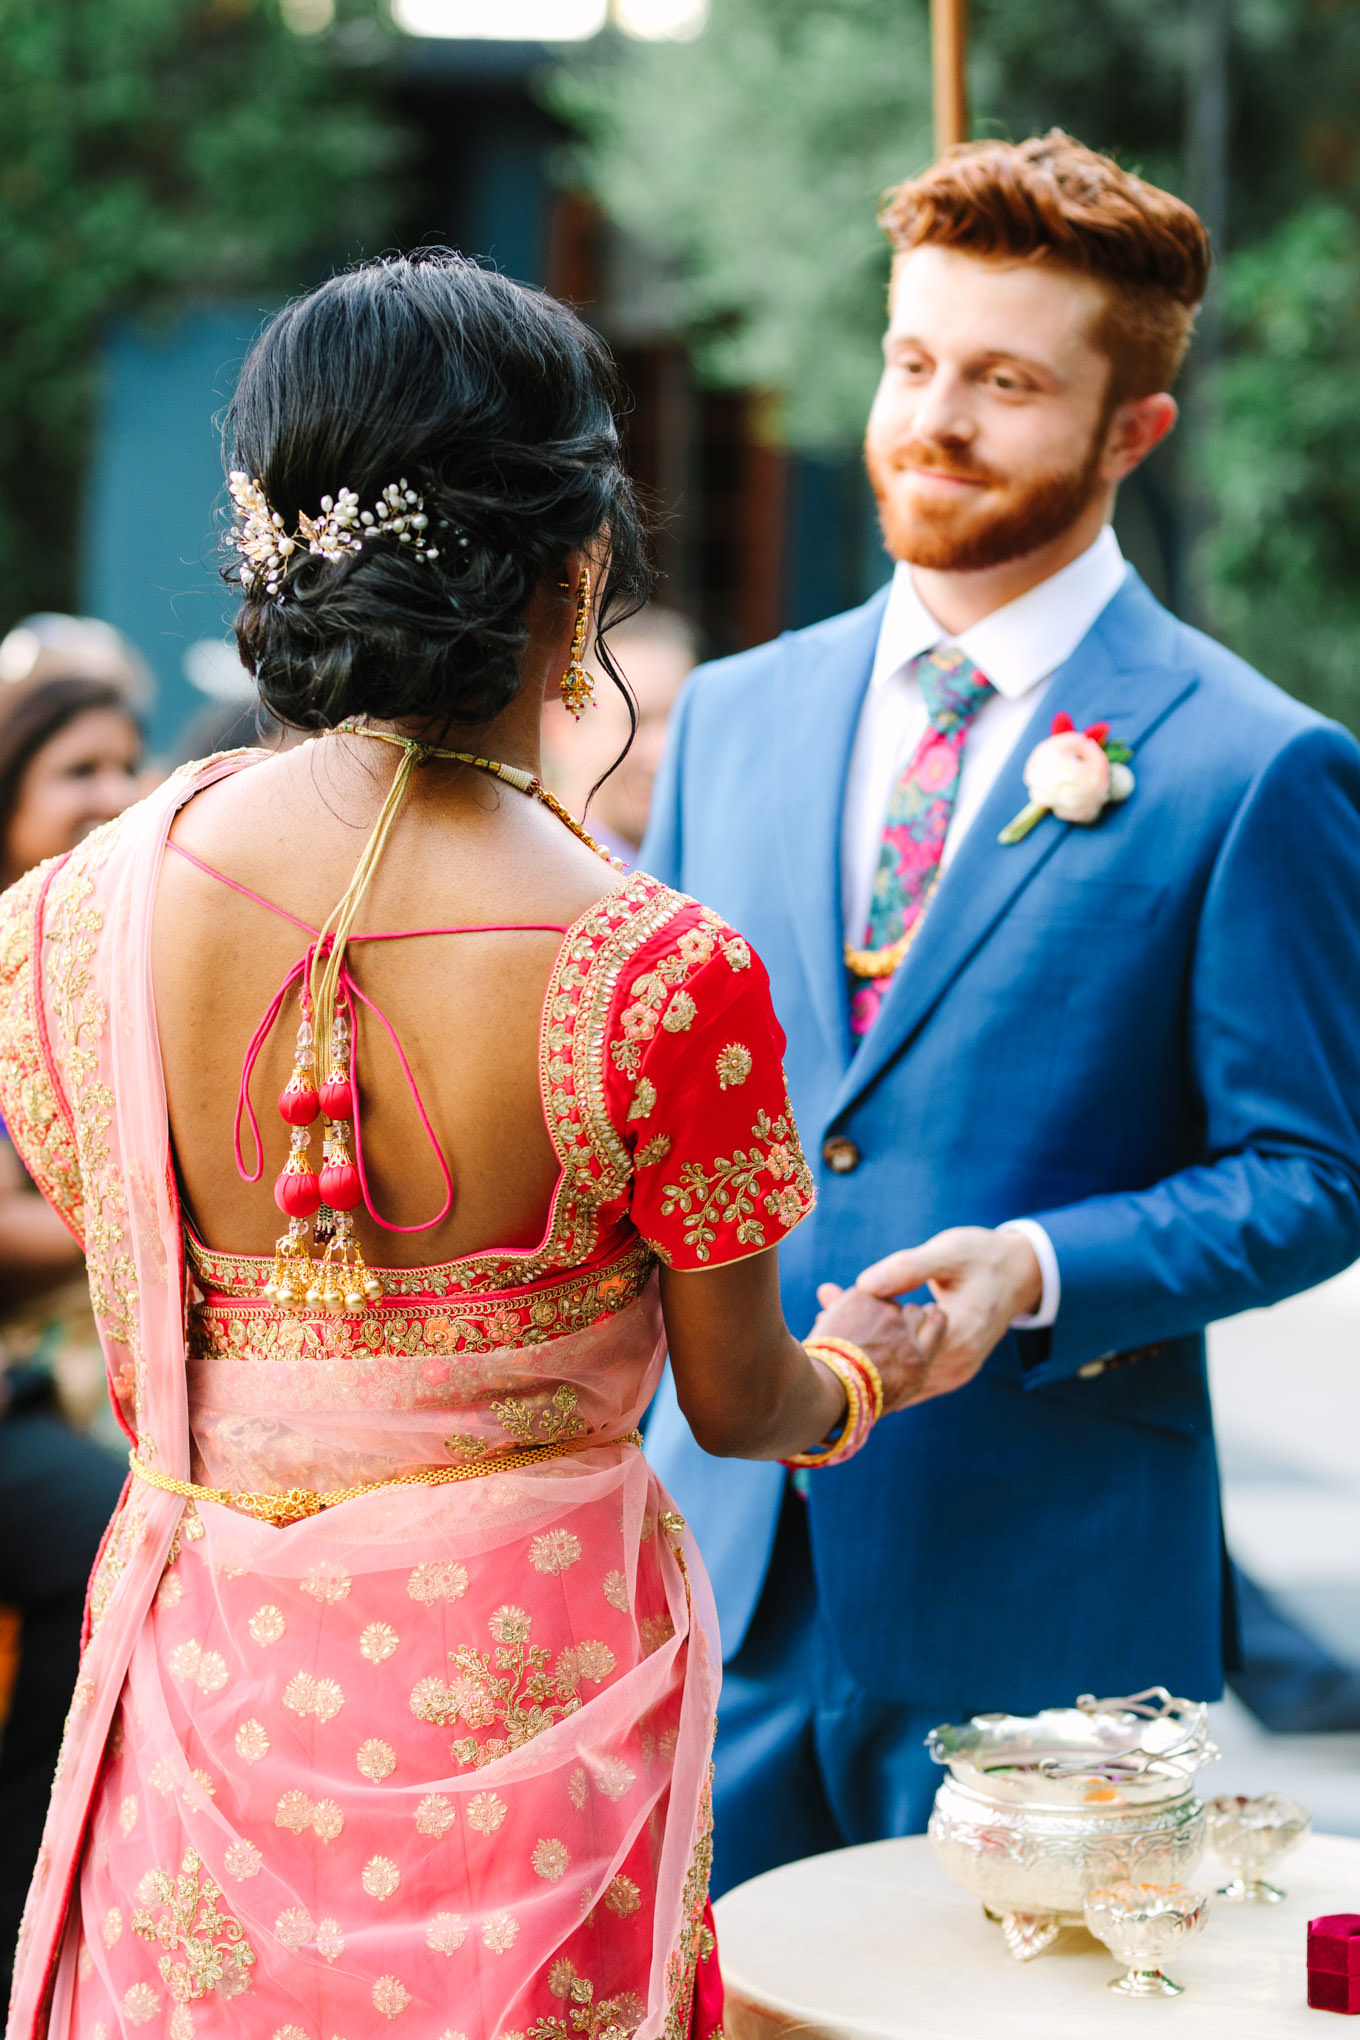 Bridal red saree detail during ceremony. Two Disney artists create a unique and colorful Indian Fusion wedding at The Fig House Los Angeles, featured on Green Wedding Shoes. | Colorful and elevated wedding inspiration for fun-loving couples in Southern California | #indianwedding #indianfusionwedding #thefighouse #losangeleswedding   Source: Mary Costa Photography | Los Angeles